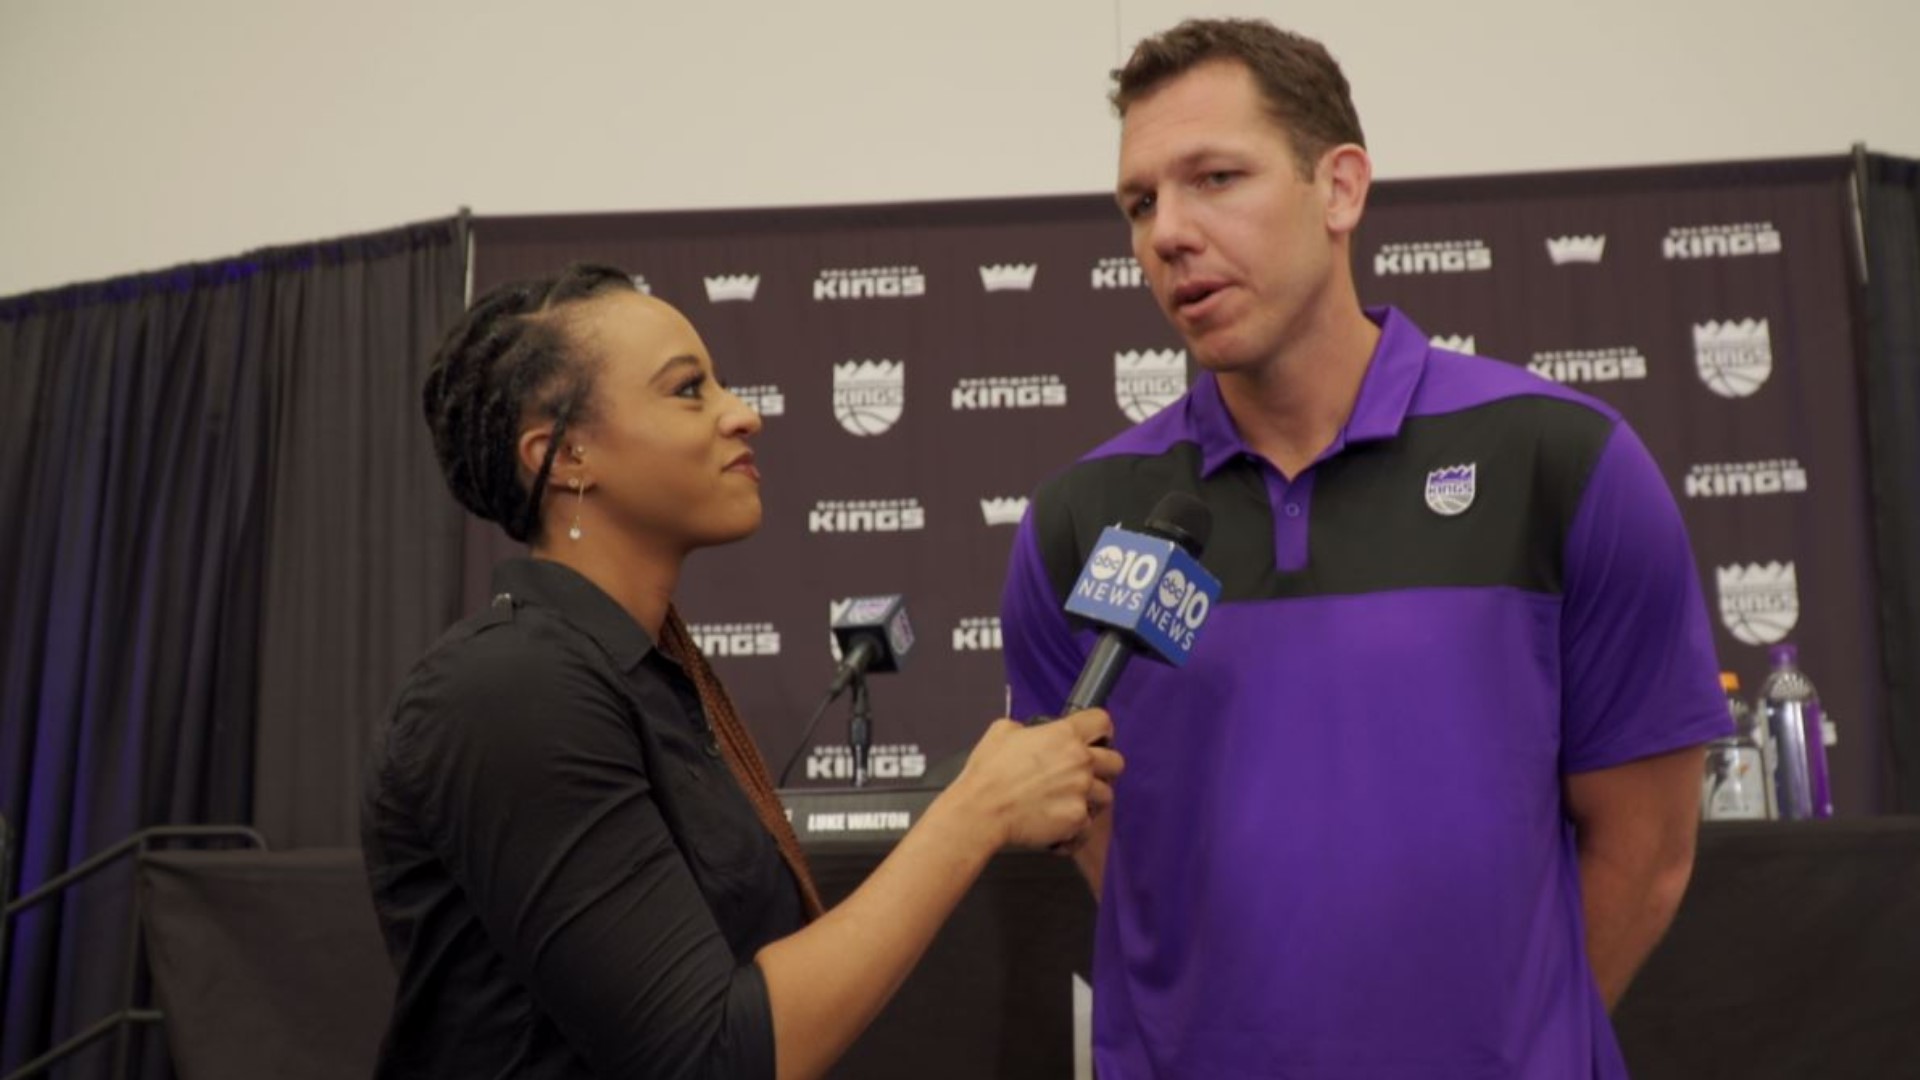 New Kings head coach Luke Walton speaks with ABC10's Lina Washington and Sean Cunningham about his desire to come to Sacramento, appealing to a Laker hating fan base, his coaching history and how he differs from his Hall-of-Fame father Bill Walton.